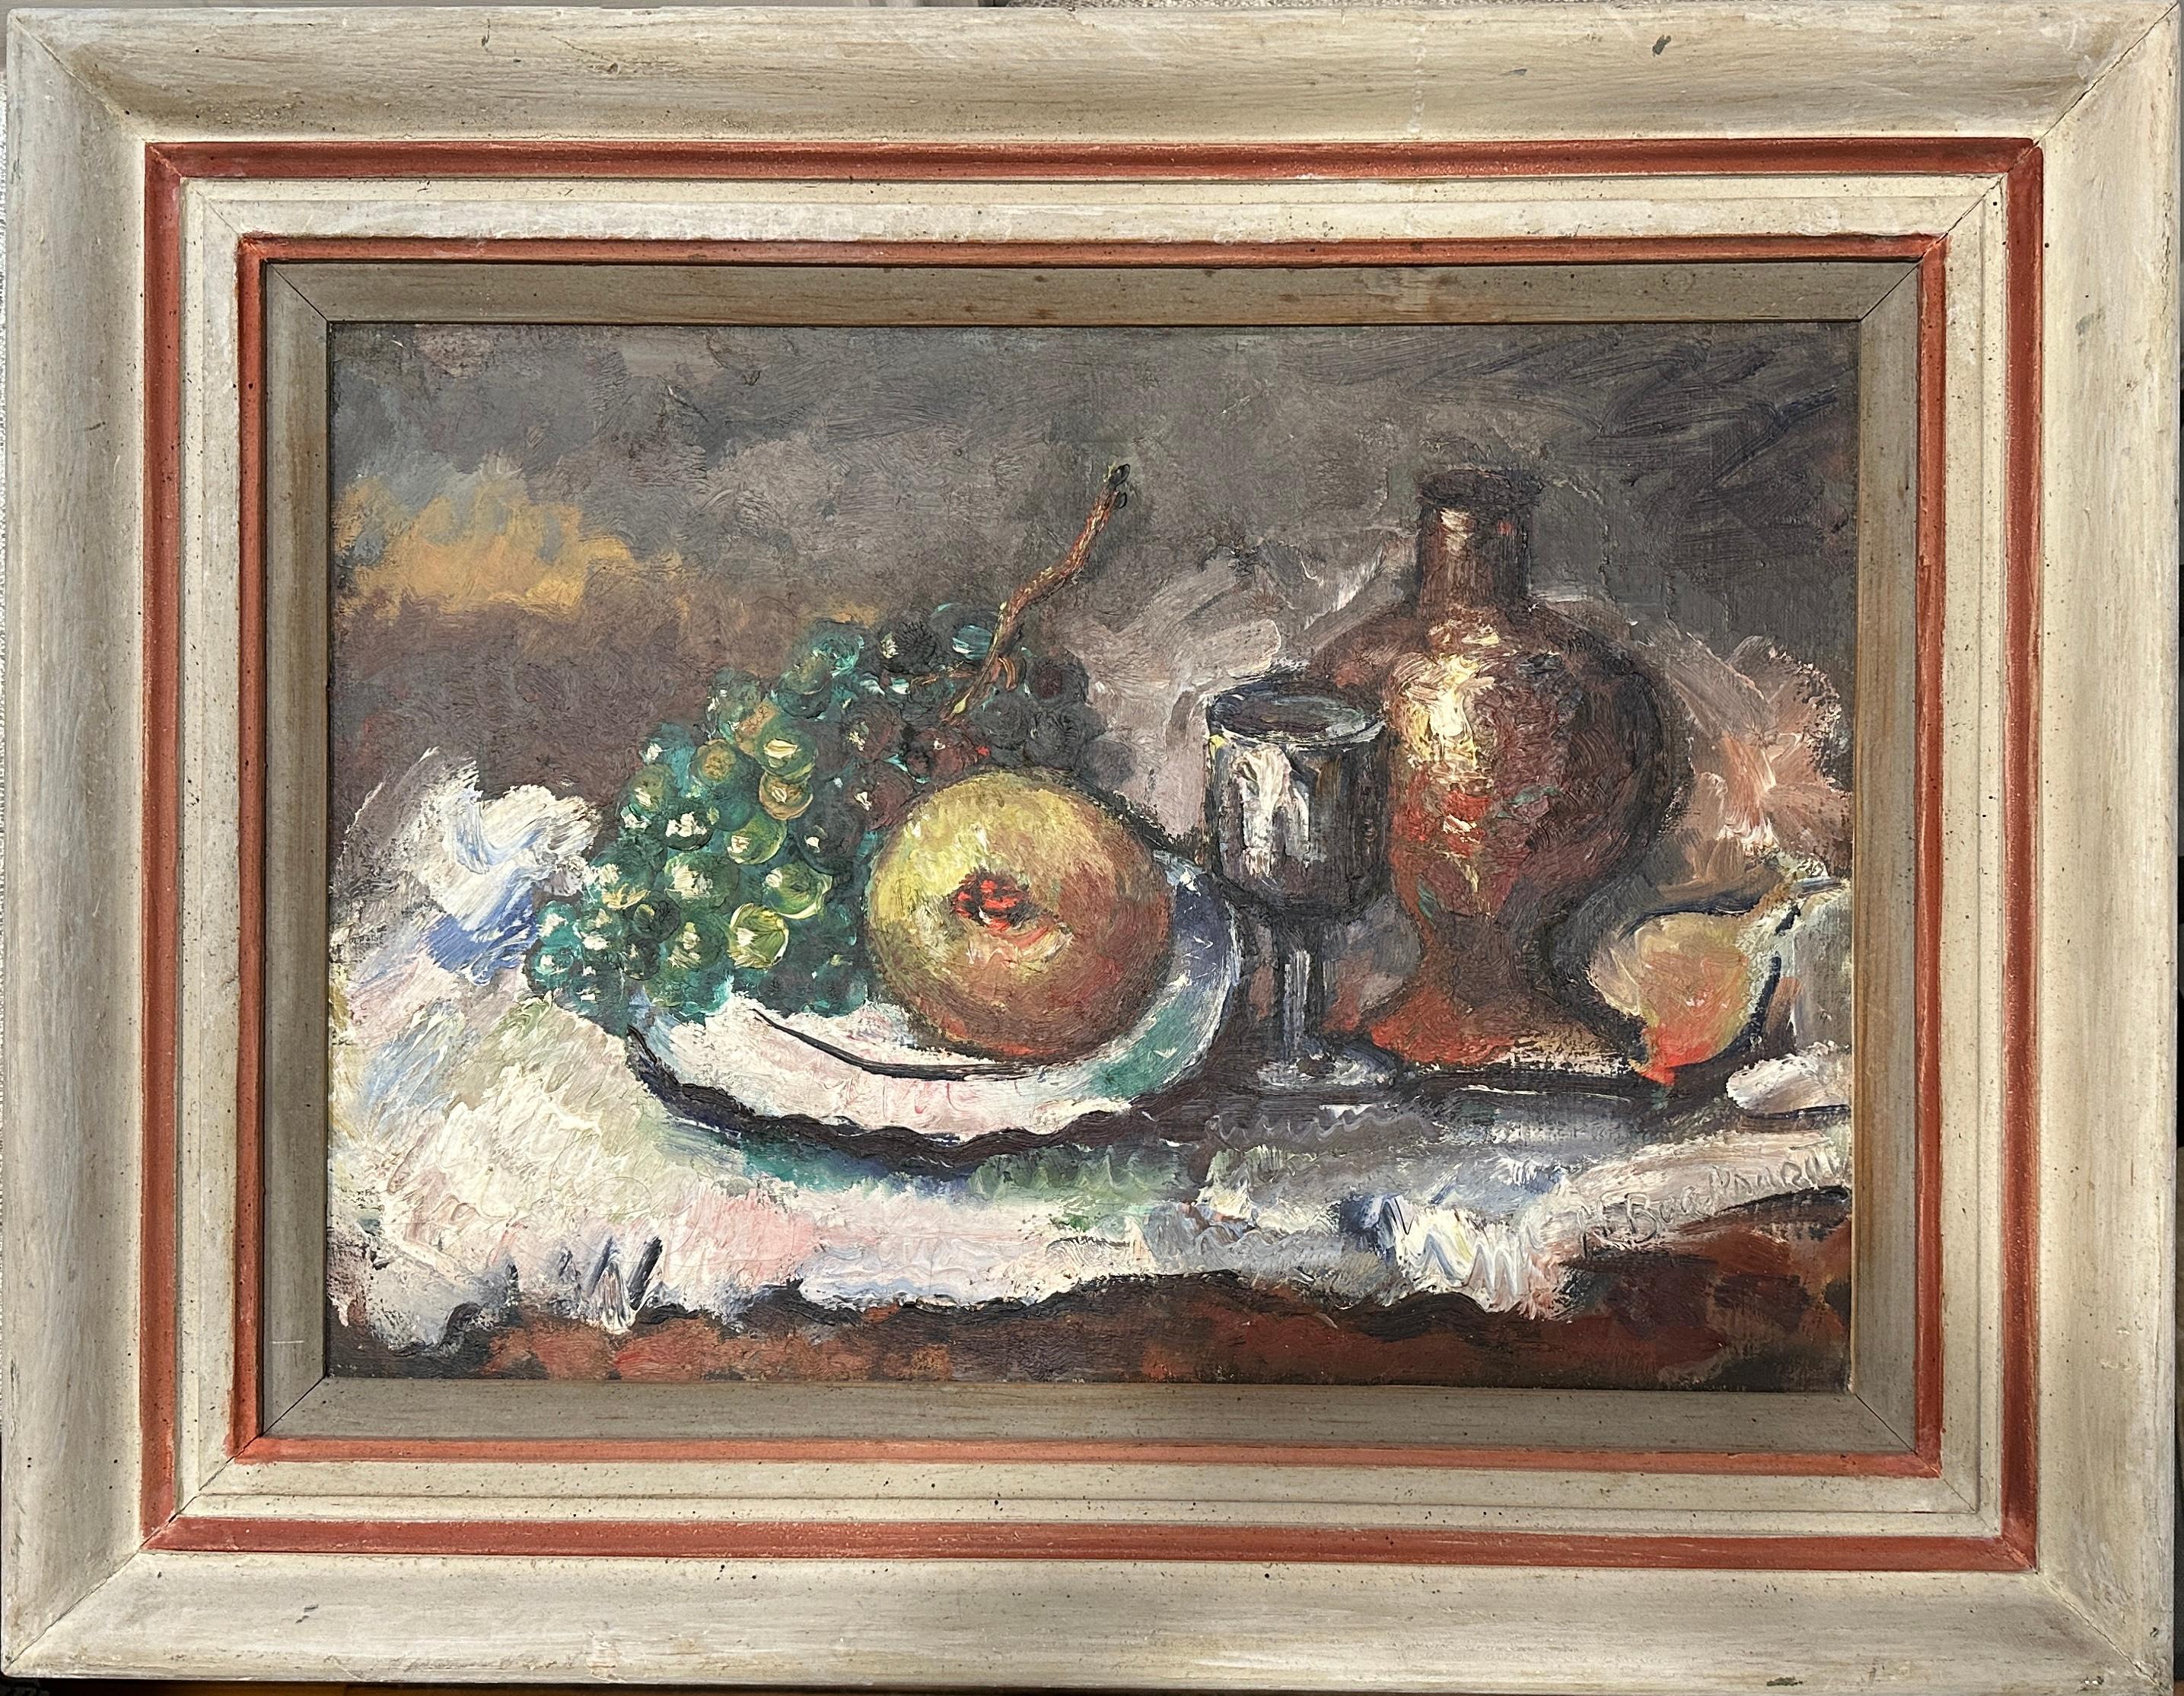 Hand-signed "H Burkardt" in wet paint lower right.
Verso Annotations "Burkhardt" on frame in pencil. 

This artwork was given by the artist to his daughter Elsa. She then gave it to her son (the artist's grandson), with the inscription "For David,